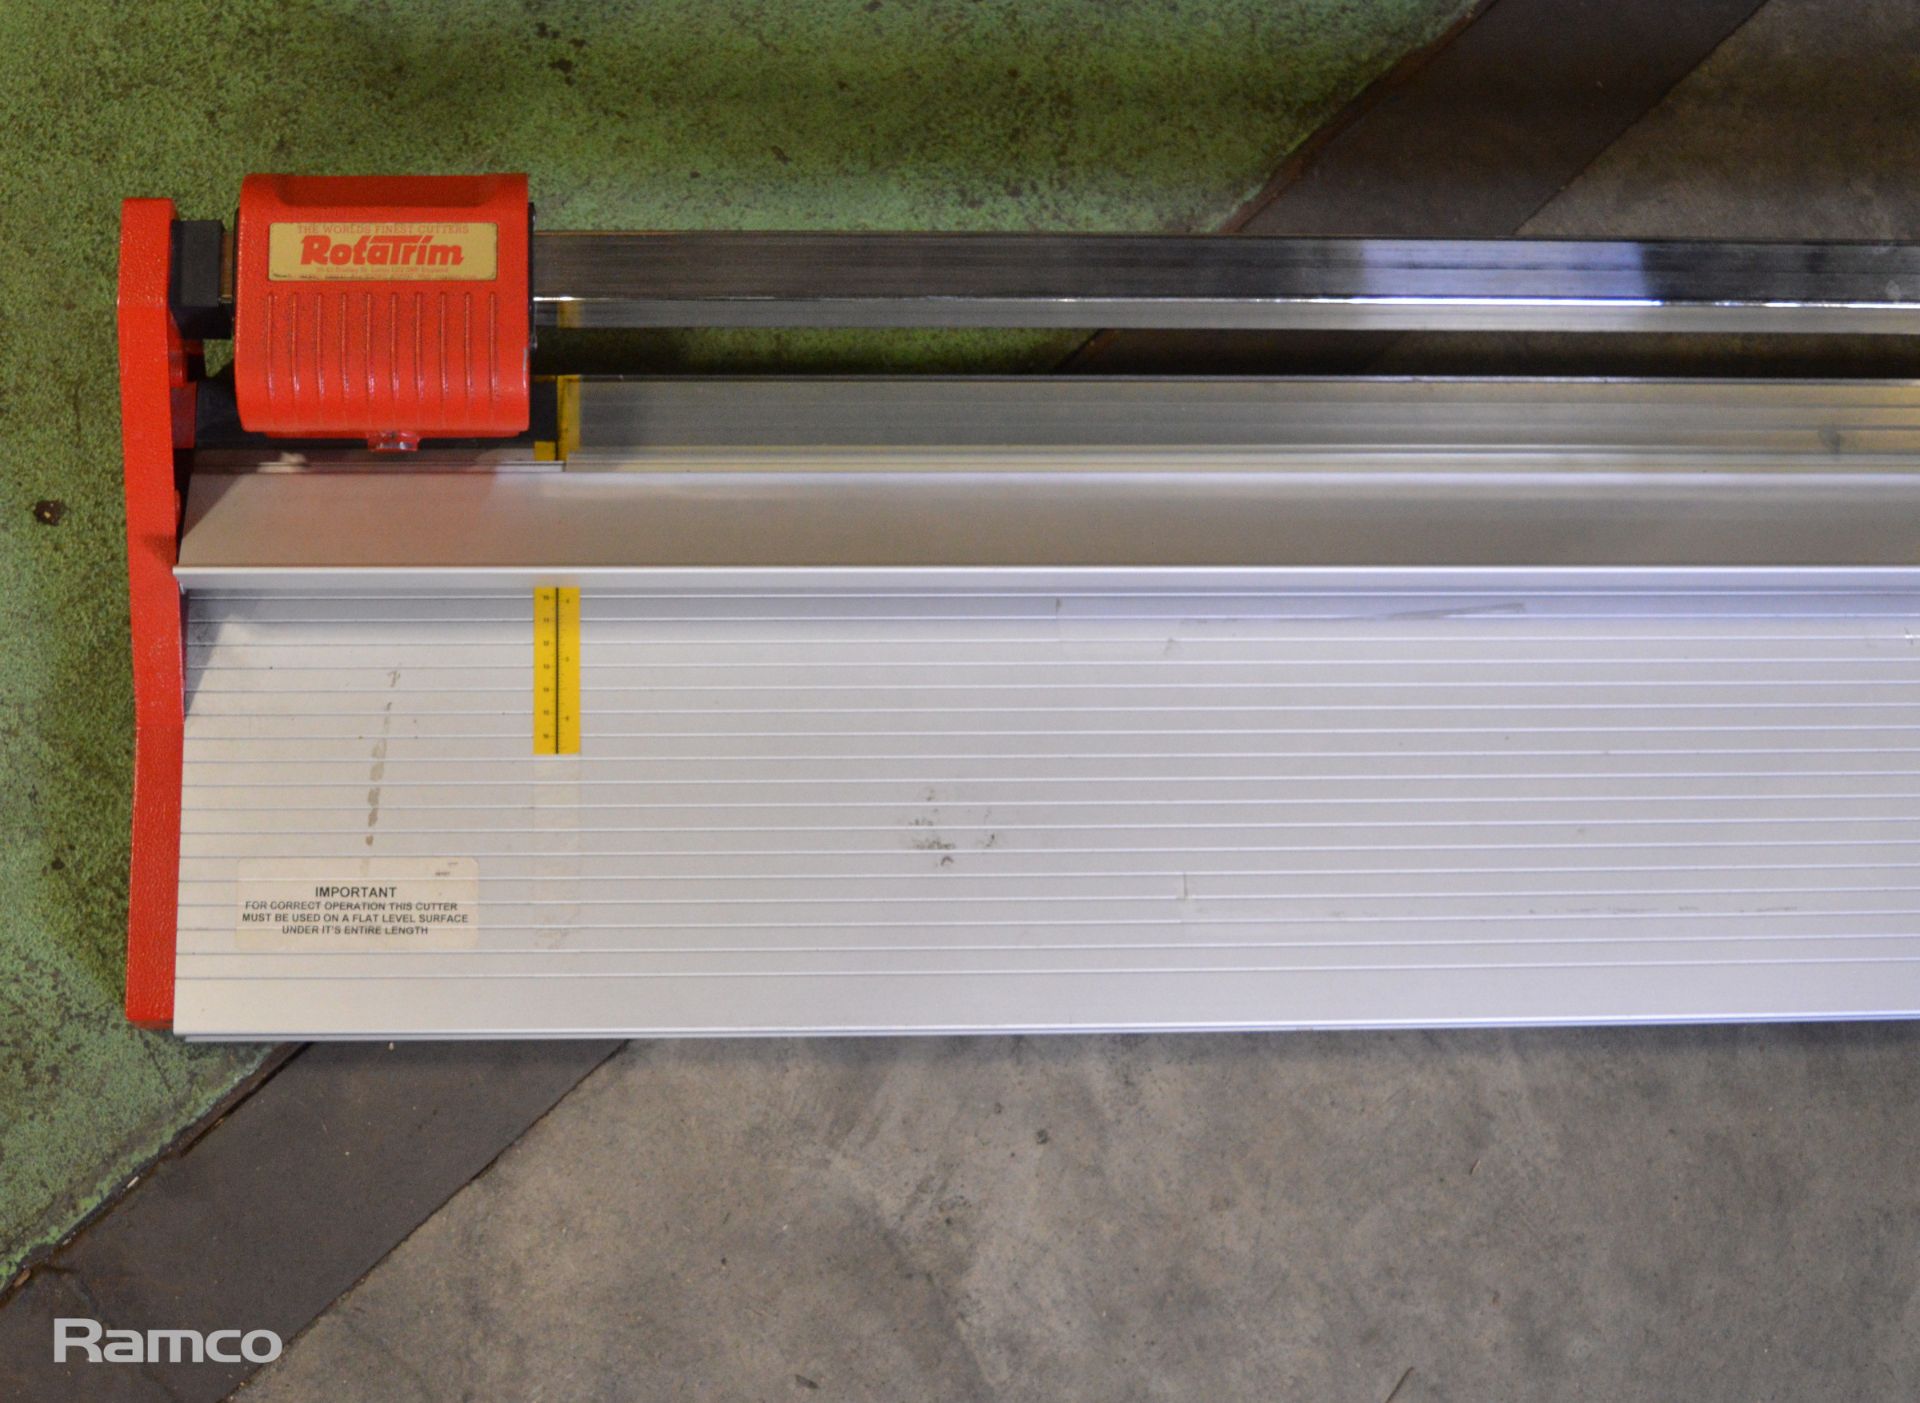 Rotatrim Paper Trimmer / Cutter - 2250mm long - Image 2 of 6